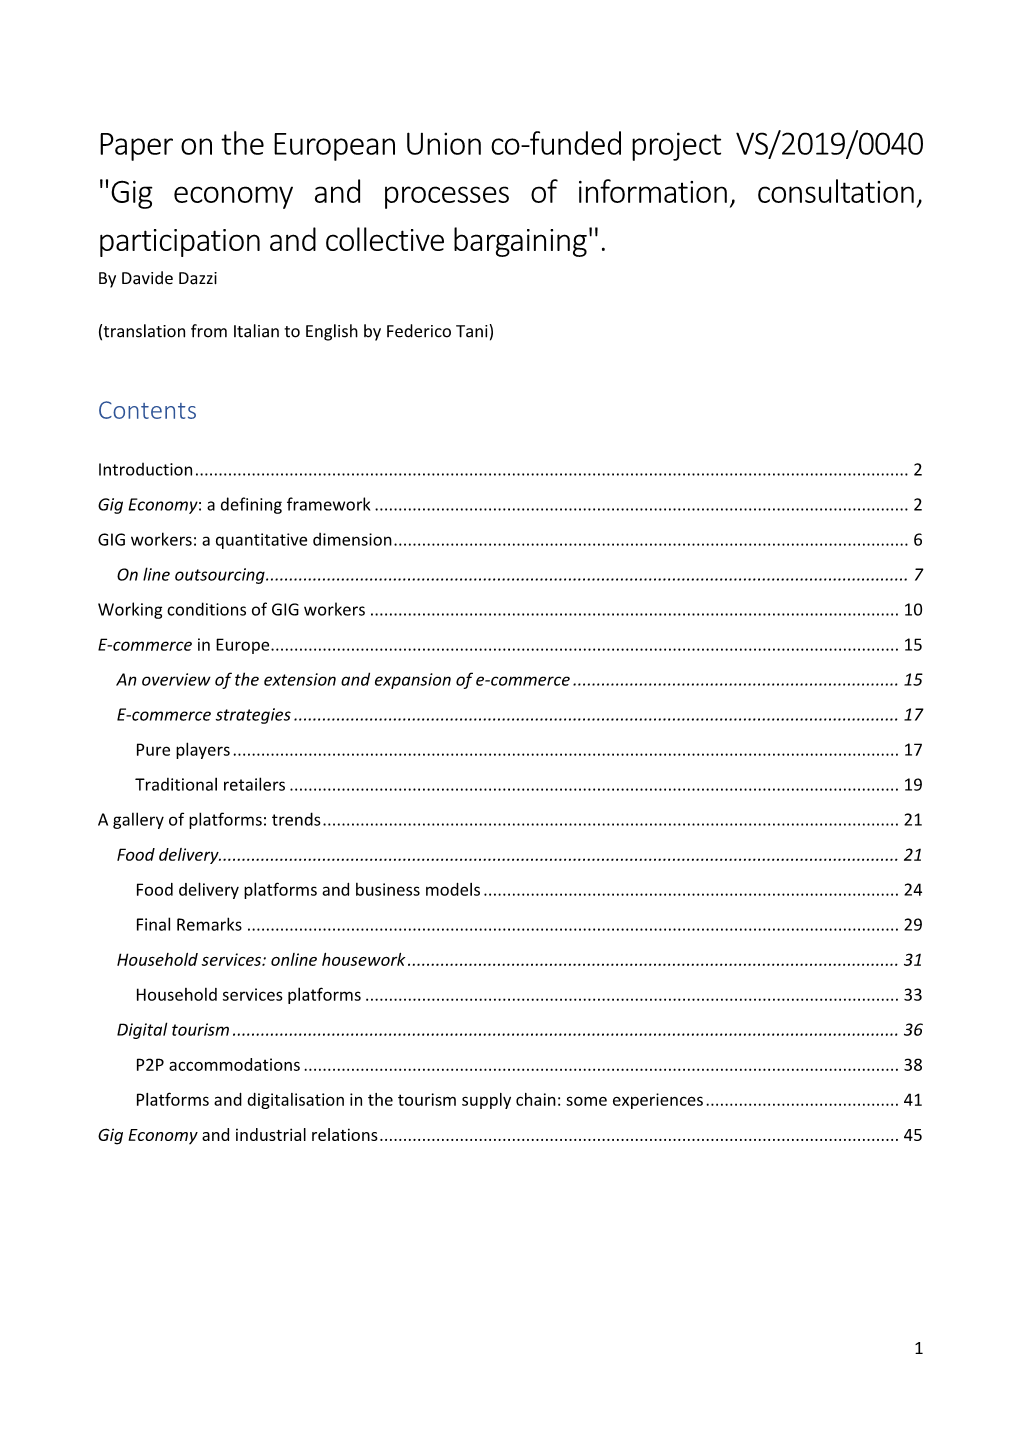 Gig Economy and Processes of Information, Consultation, Participation and Collective Bargaining"